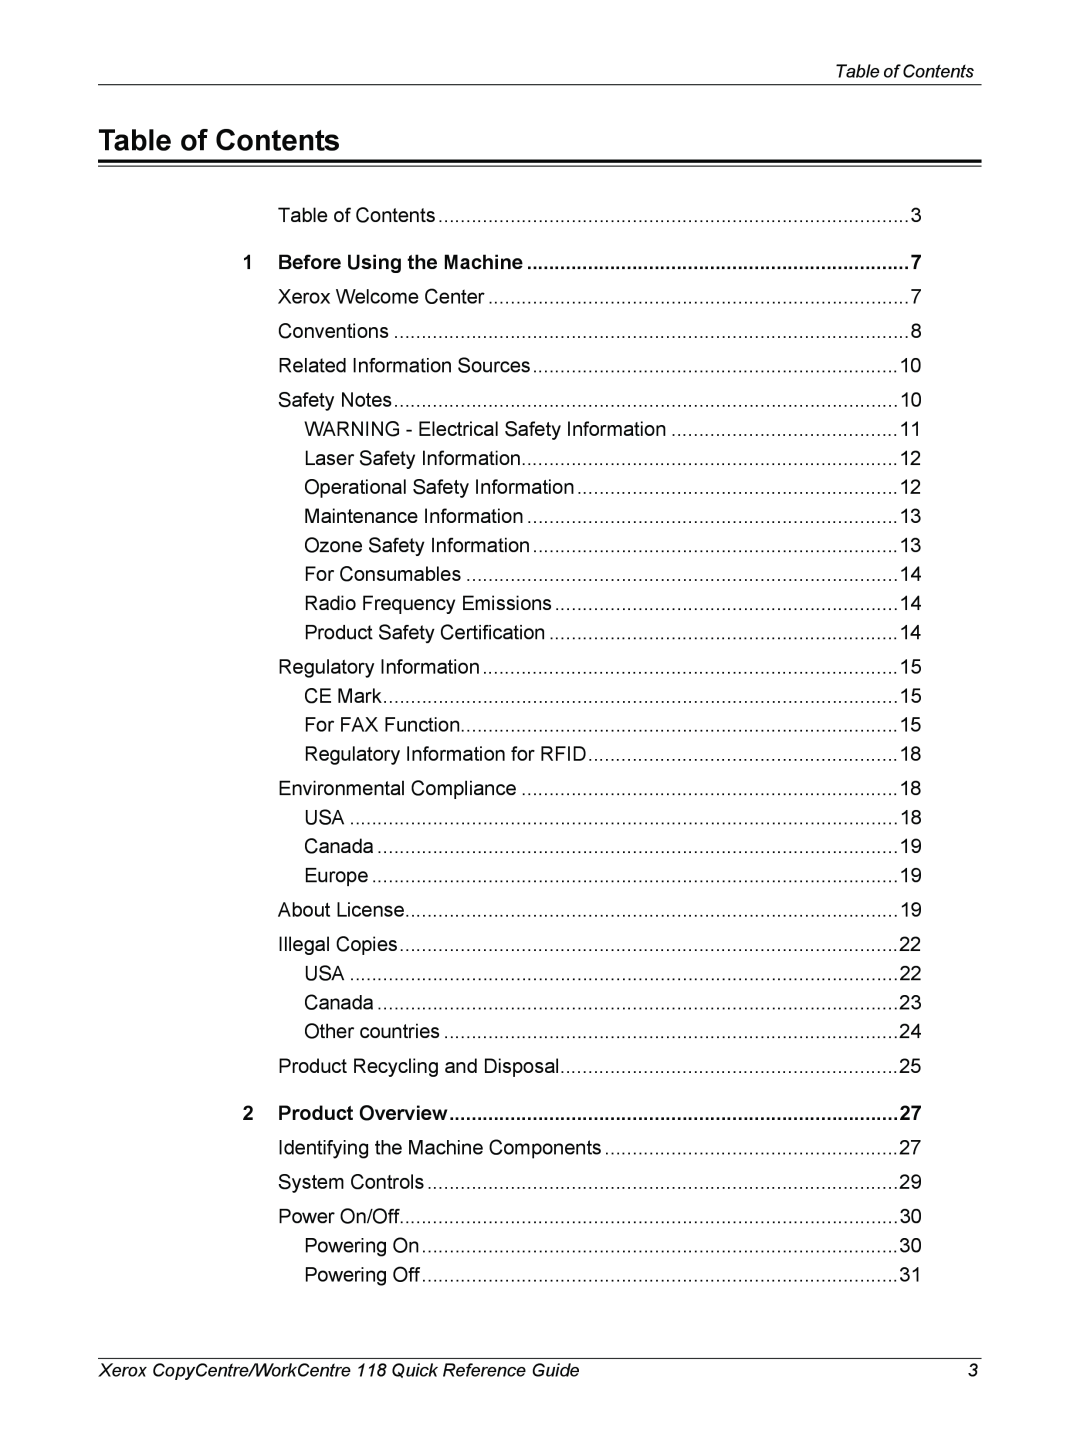 Xerox C118, M118i manual Table of Contents, Product Overview 